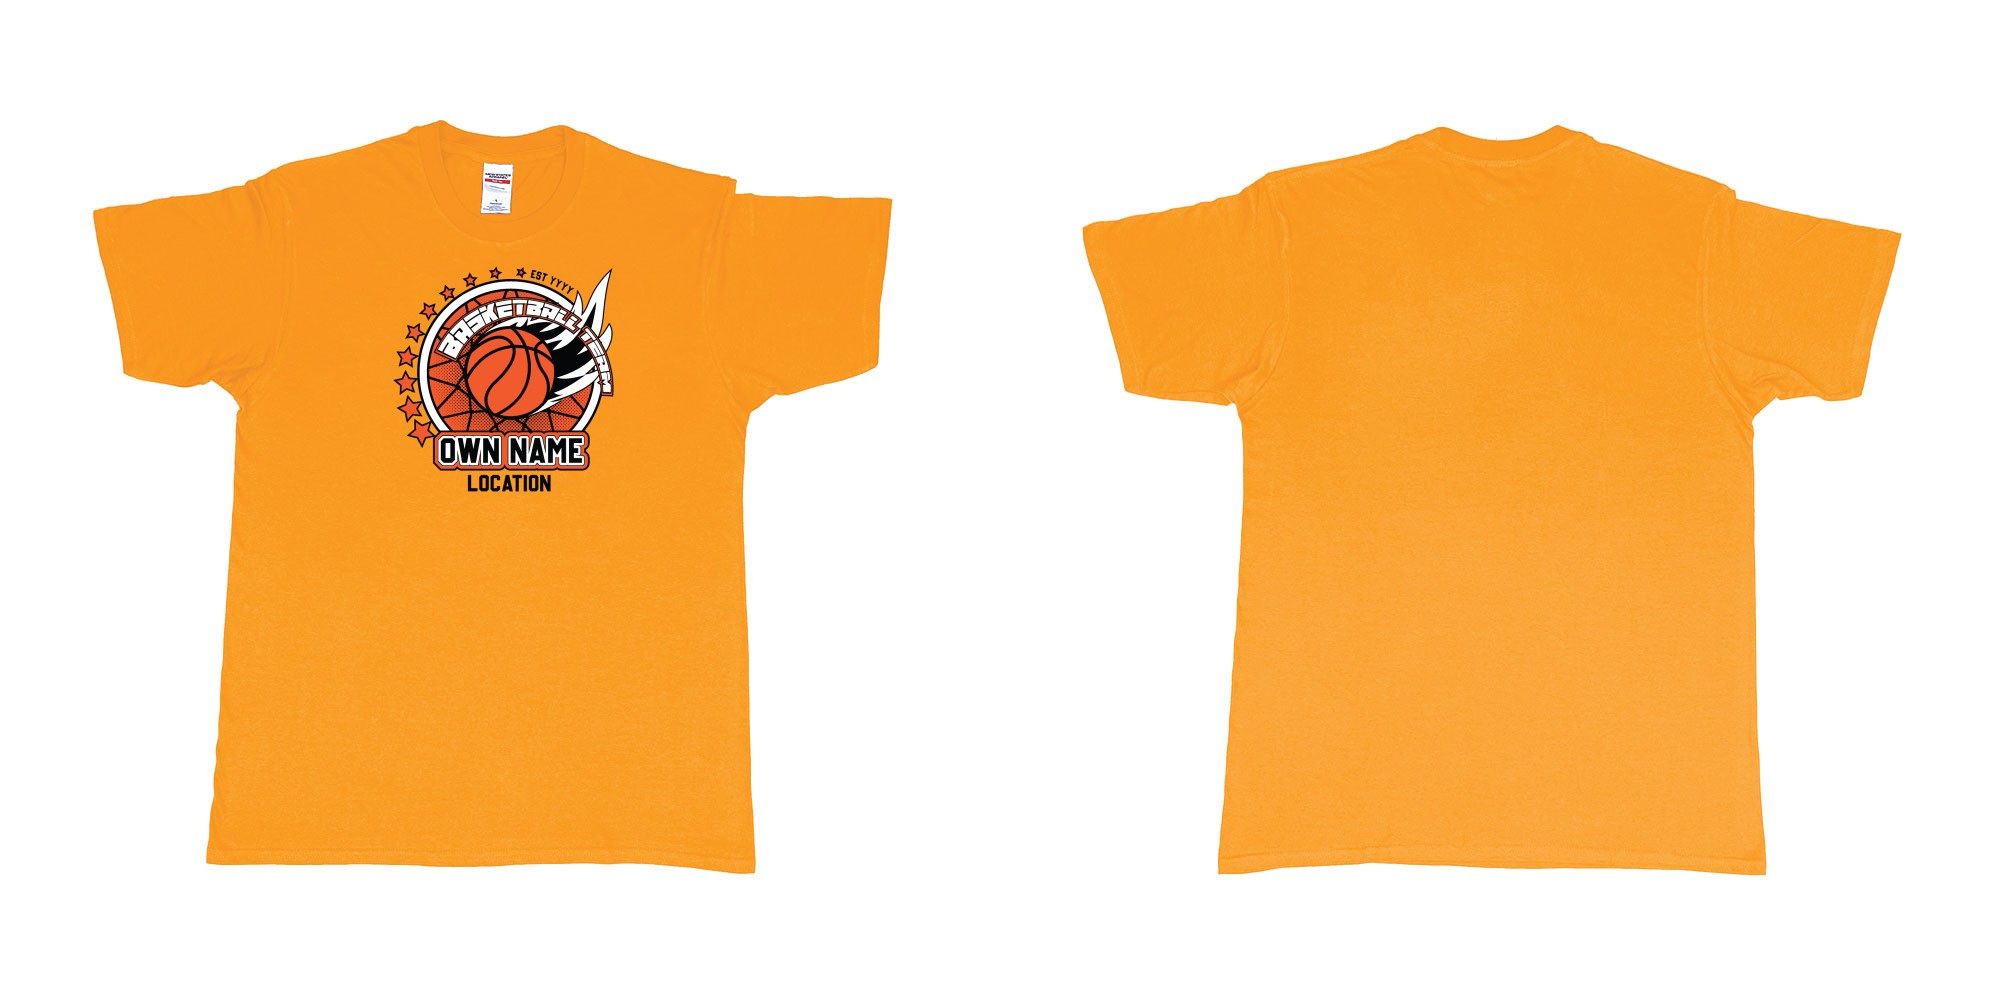 Custom tshirt design basketball team own name location established year custom design production bali in fabric color gold choice your own text made in Bali by The Pirate Way